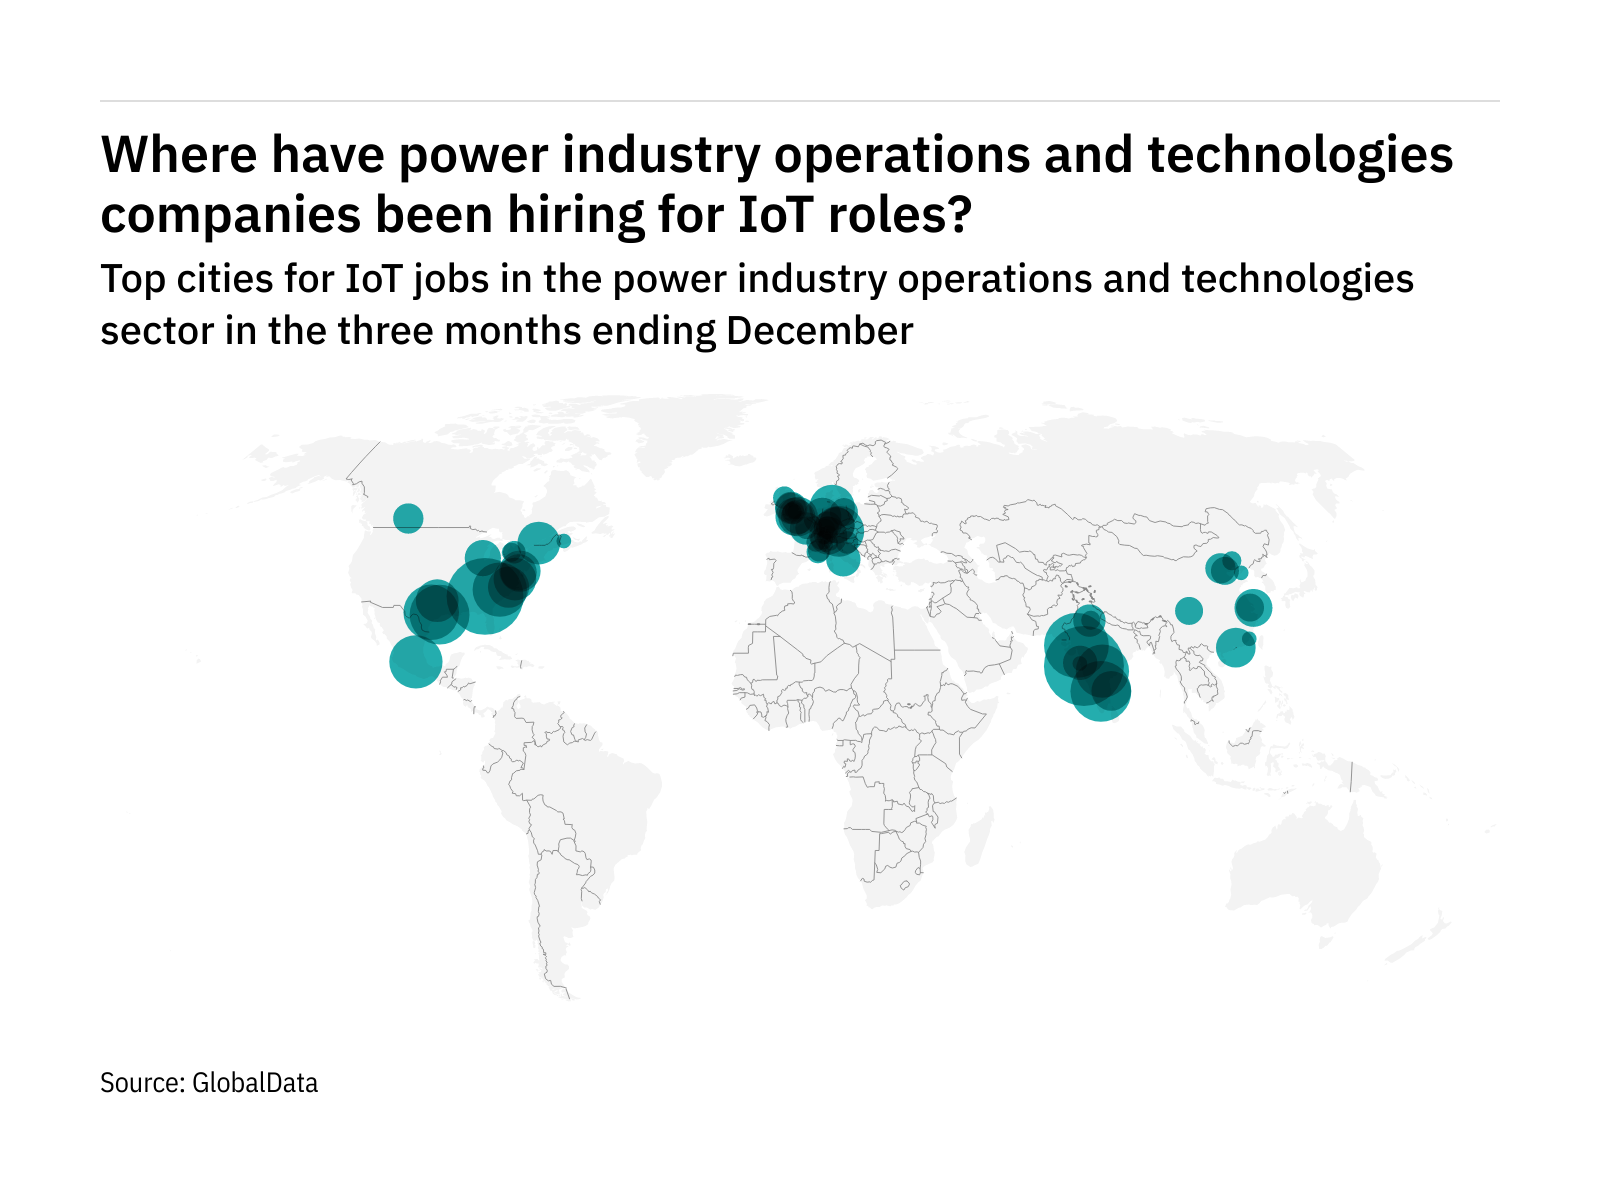 Asia-Pacific is seeing a hiring boom in power industry IoT roles